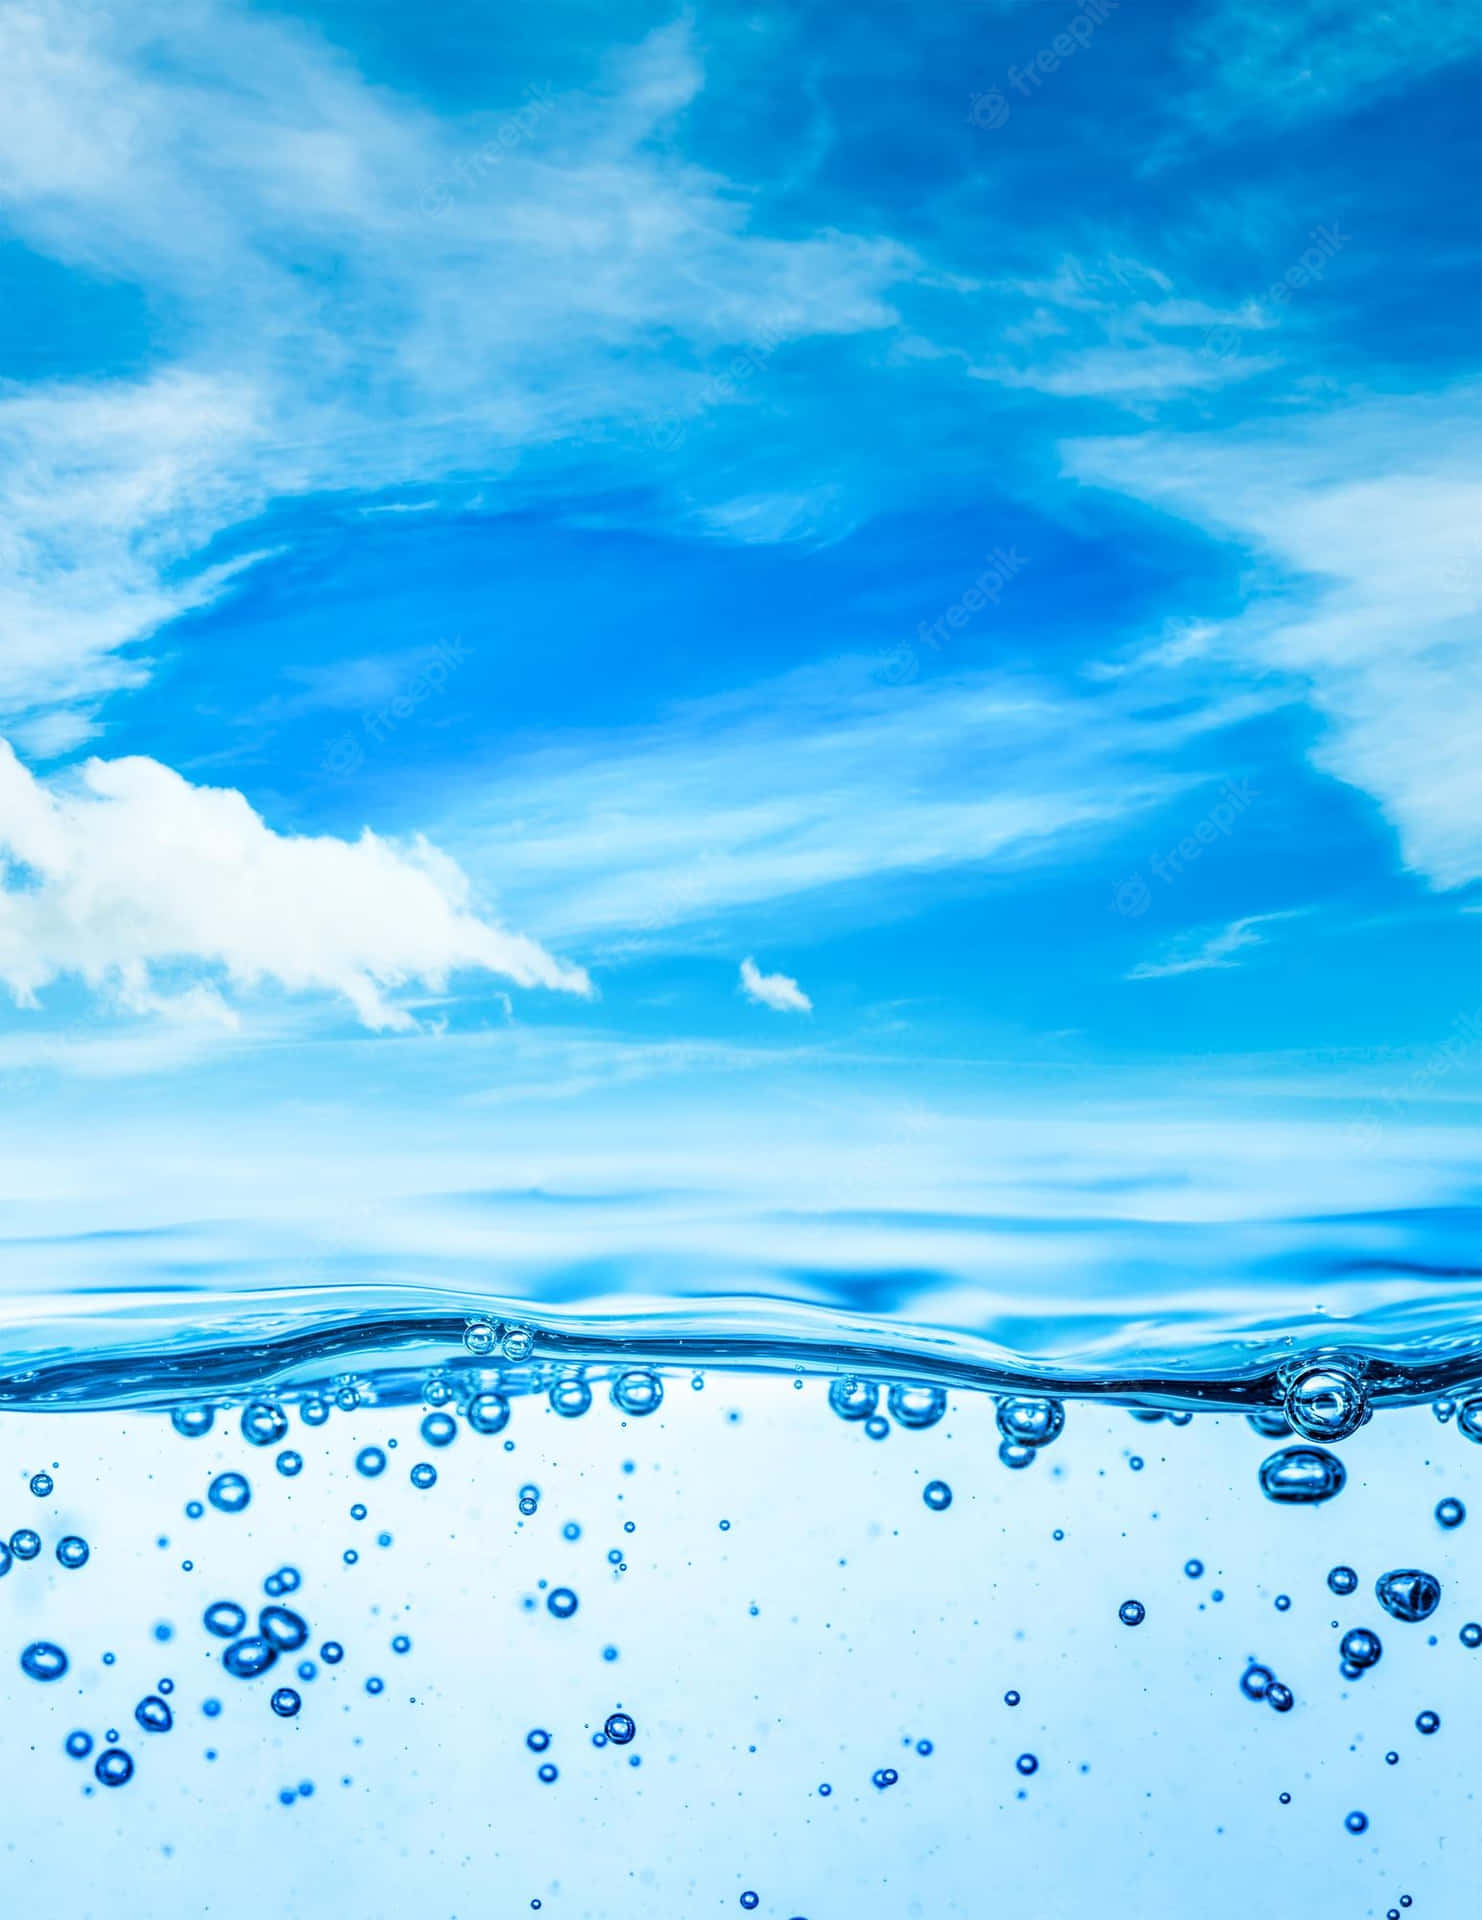 Water Bubbles In The Water Wallpaper